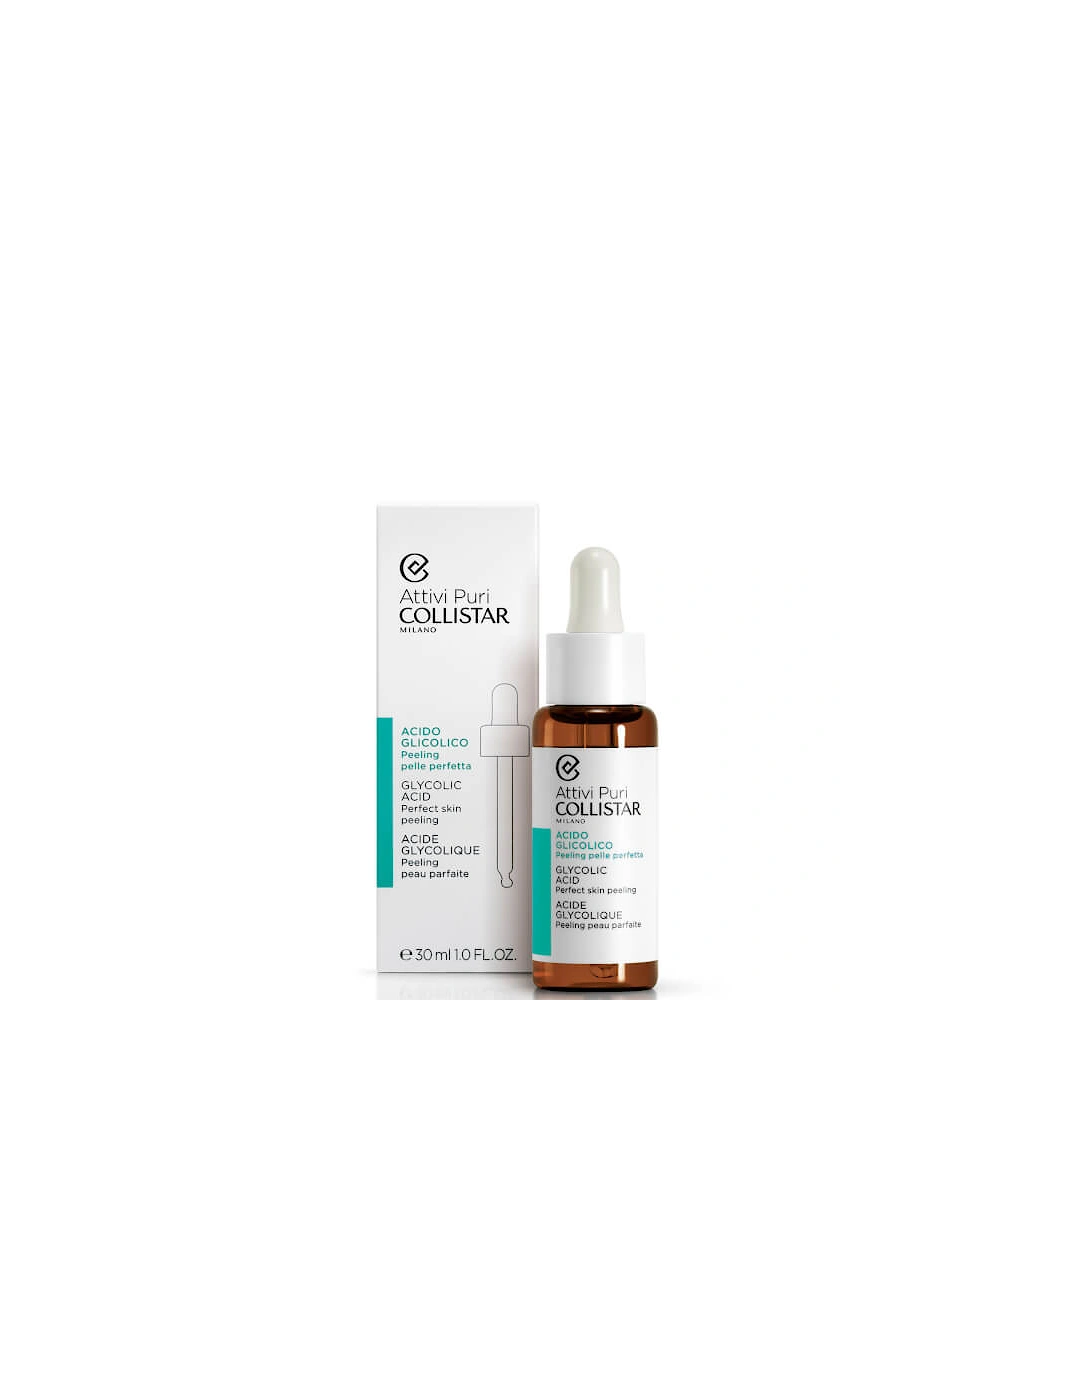 Pure Actives Glycolic Acid 30ml, 2 of 1